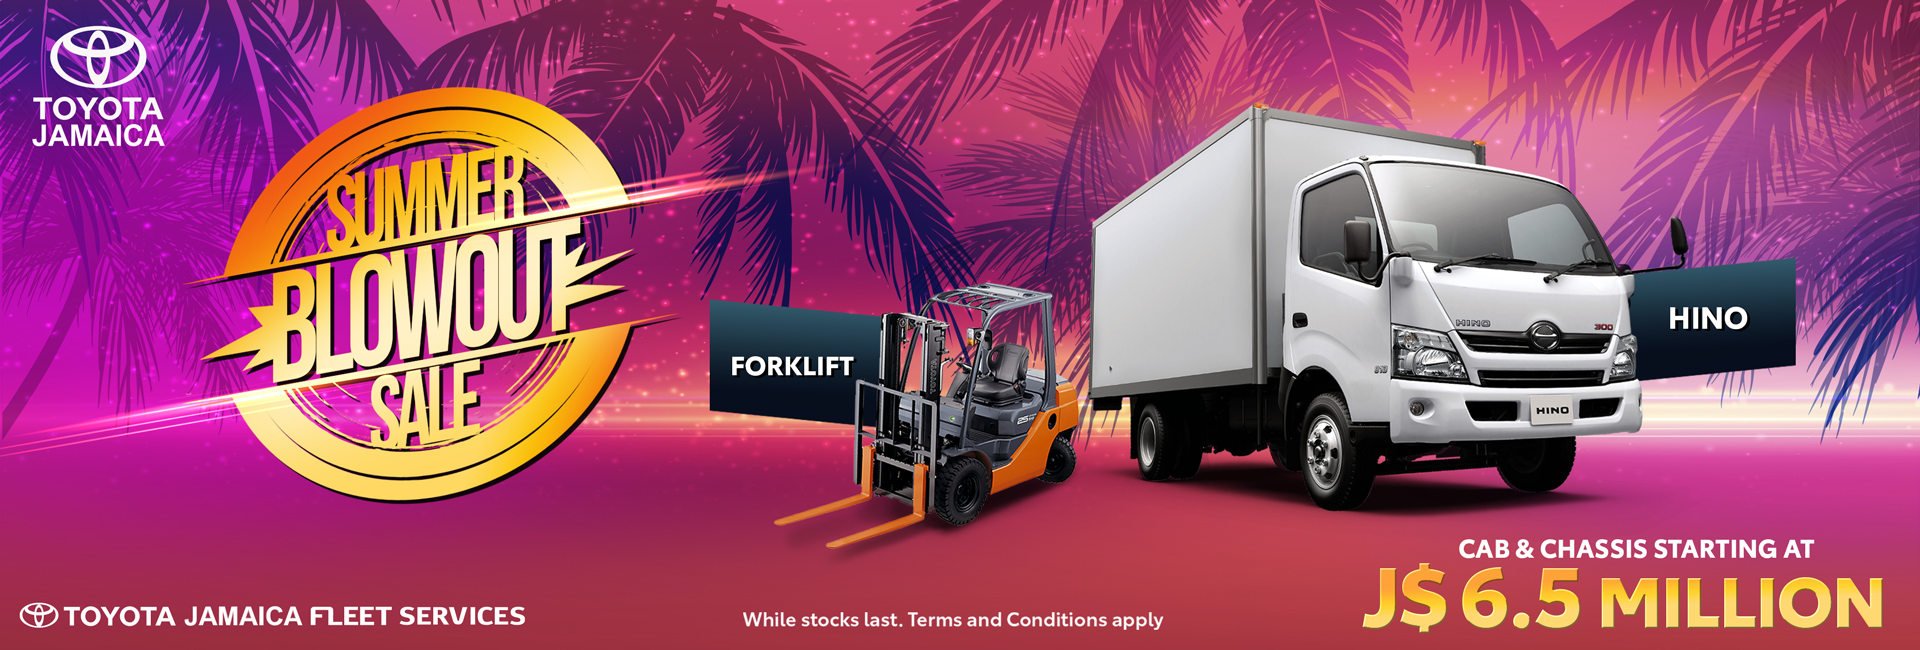 Summer blowout sale – Hino